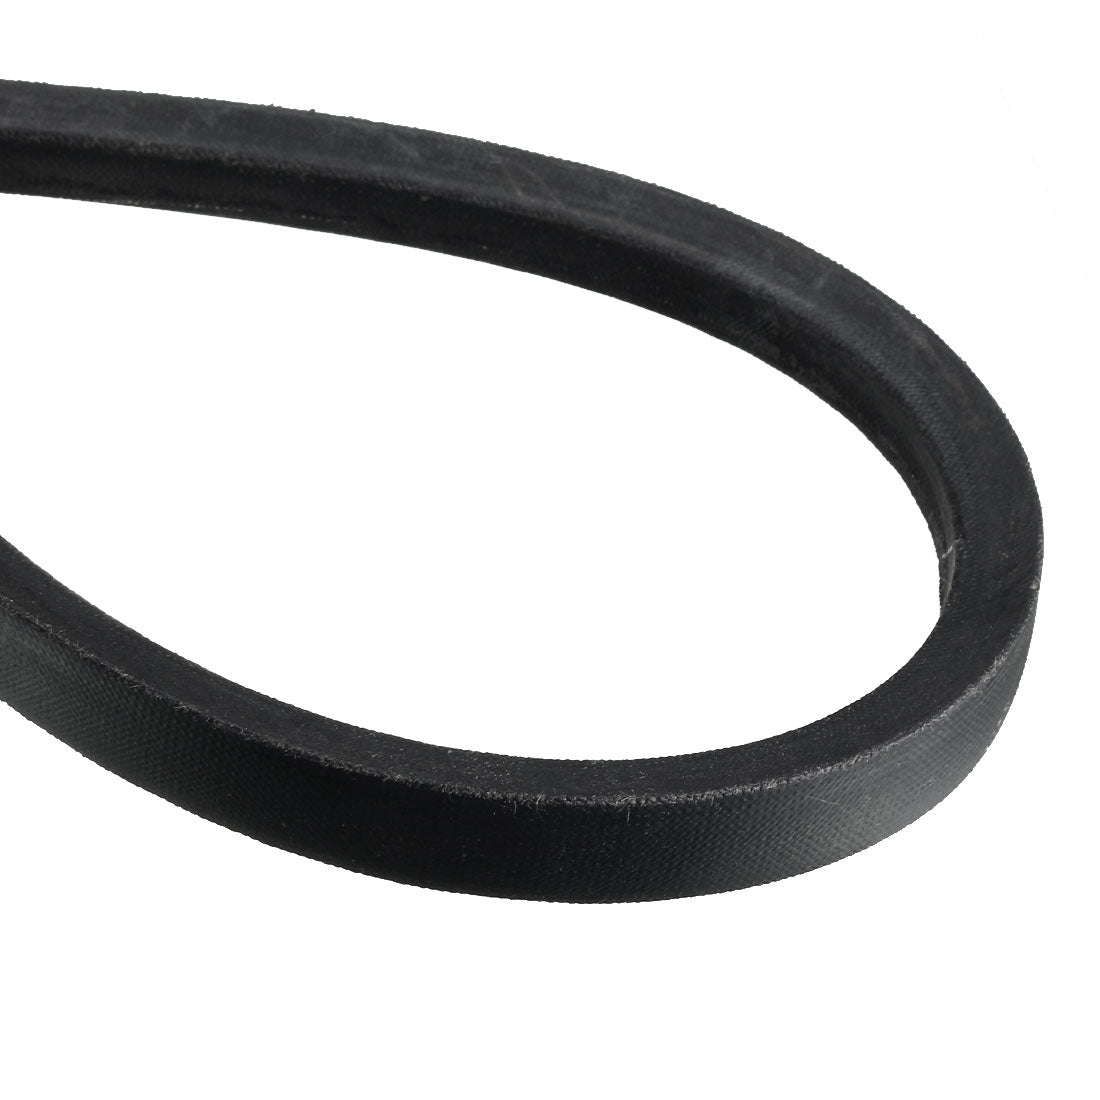 Uxcell Uxcell B-165 V-Belts 165" Pitch Length, B-Section Rubber Drive Belt